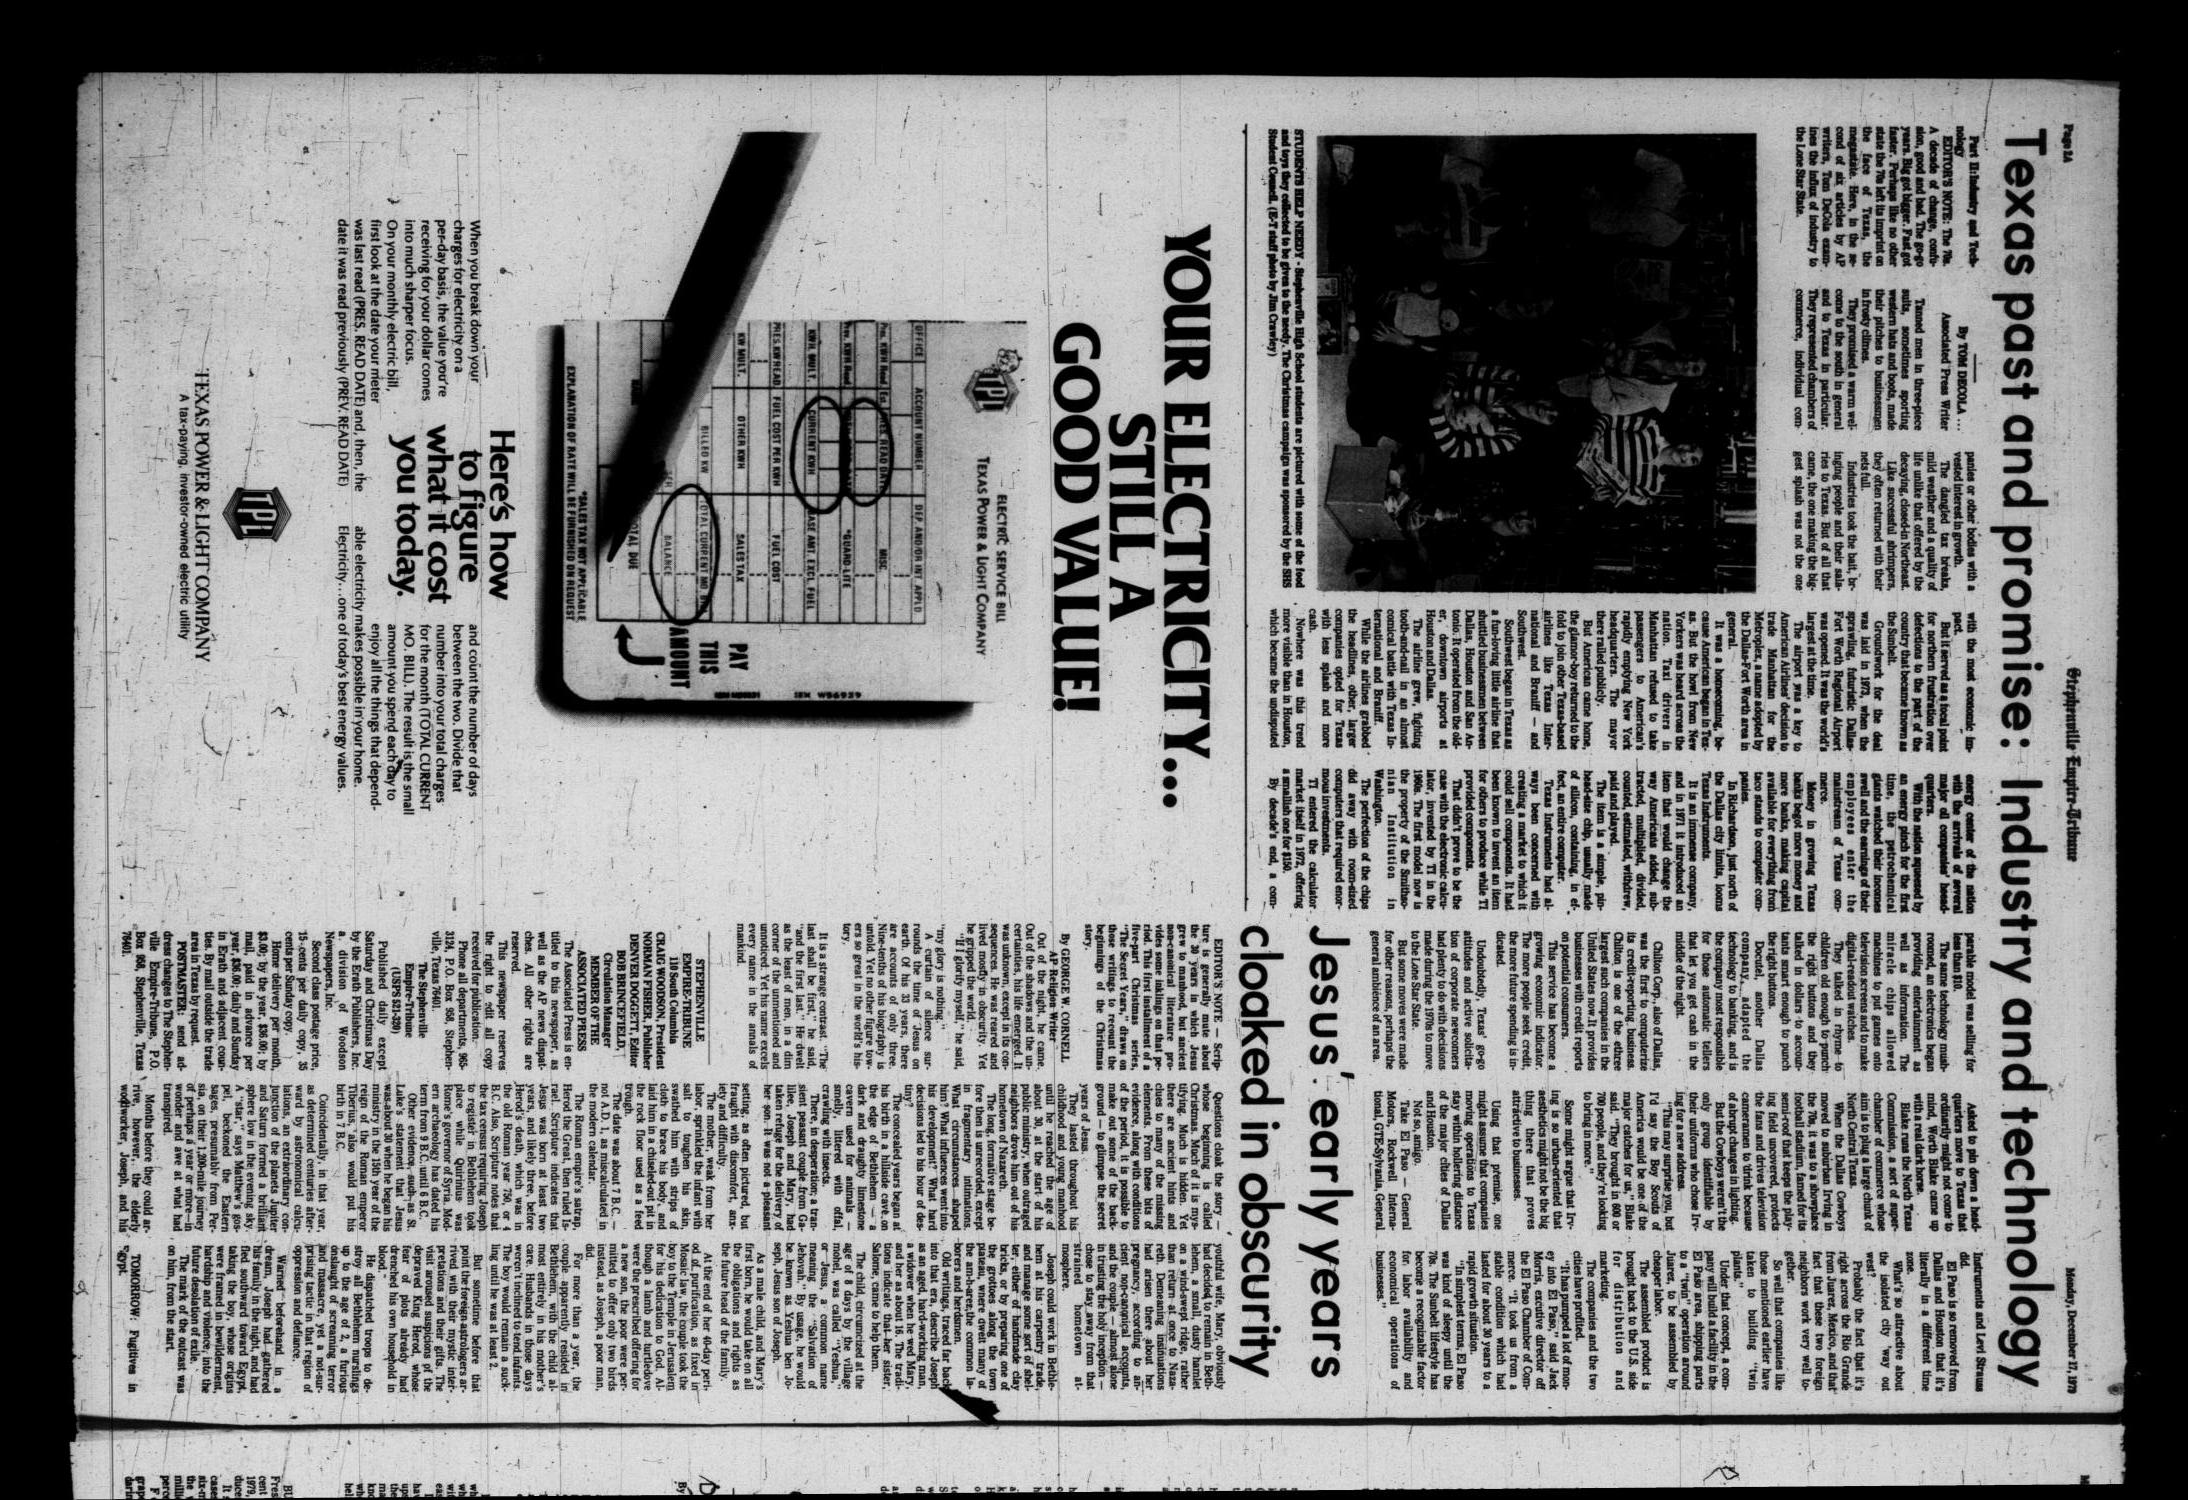 Stephenville Empire-Tribune (Stephenville, Tex.), Vol. 111, No. 104, Ed. 1 Monday, December 17, 1979
                                                
                                                    [Sequence #]: 2 of 10
                                                